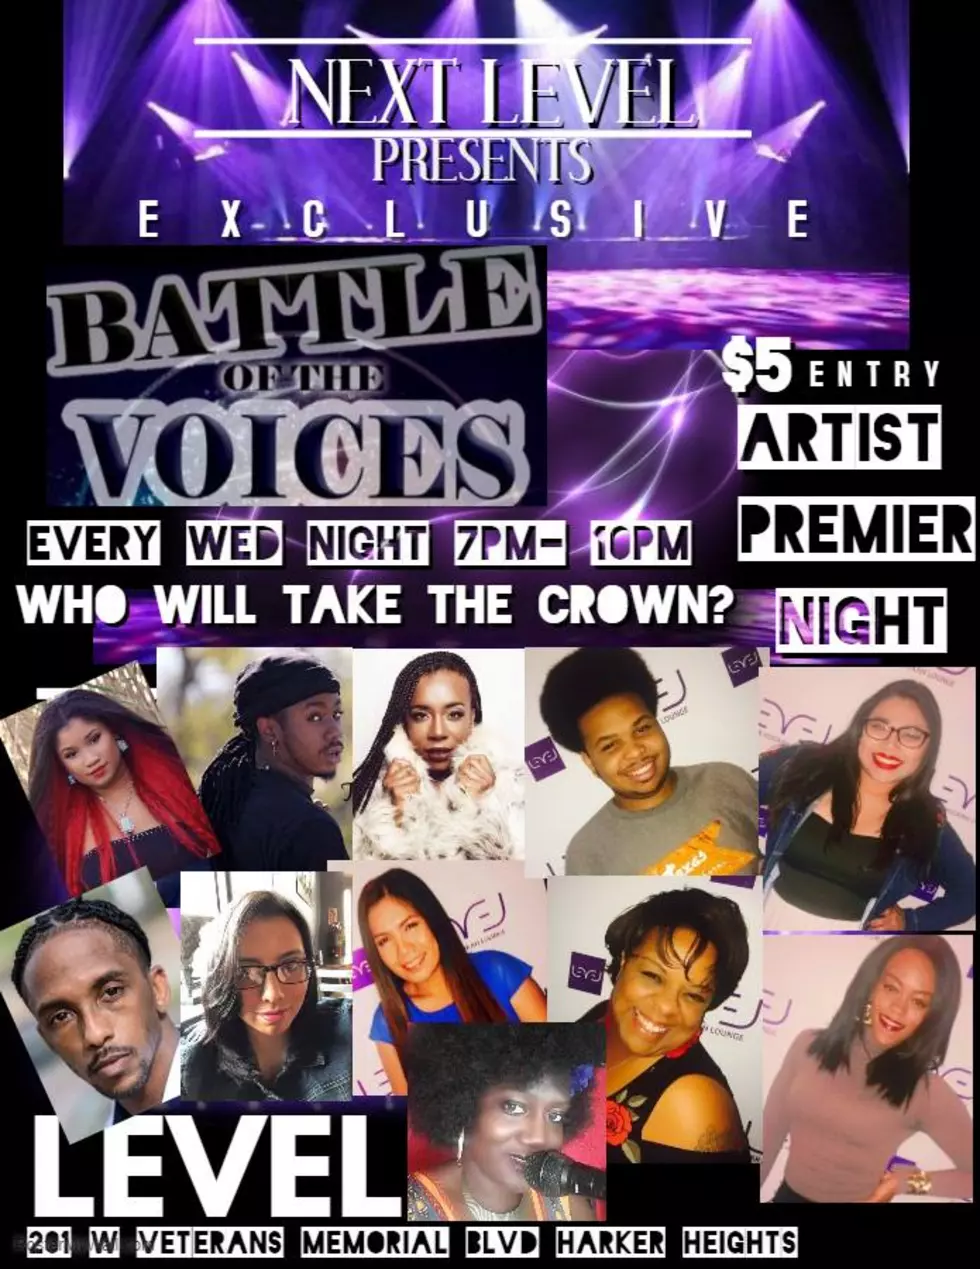 Next Level Presents Battle Of The Voices Competition